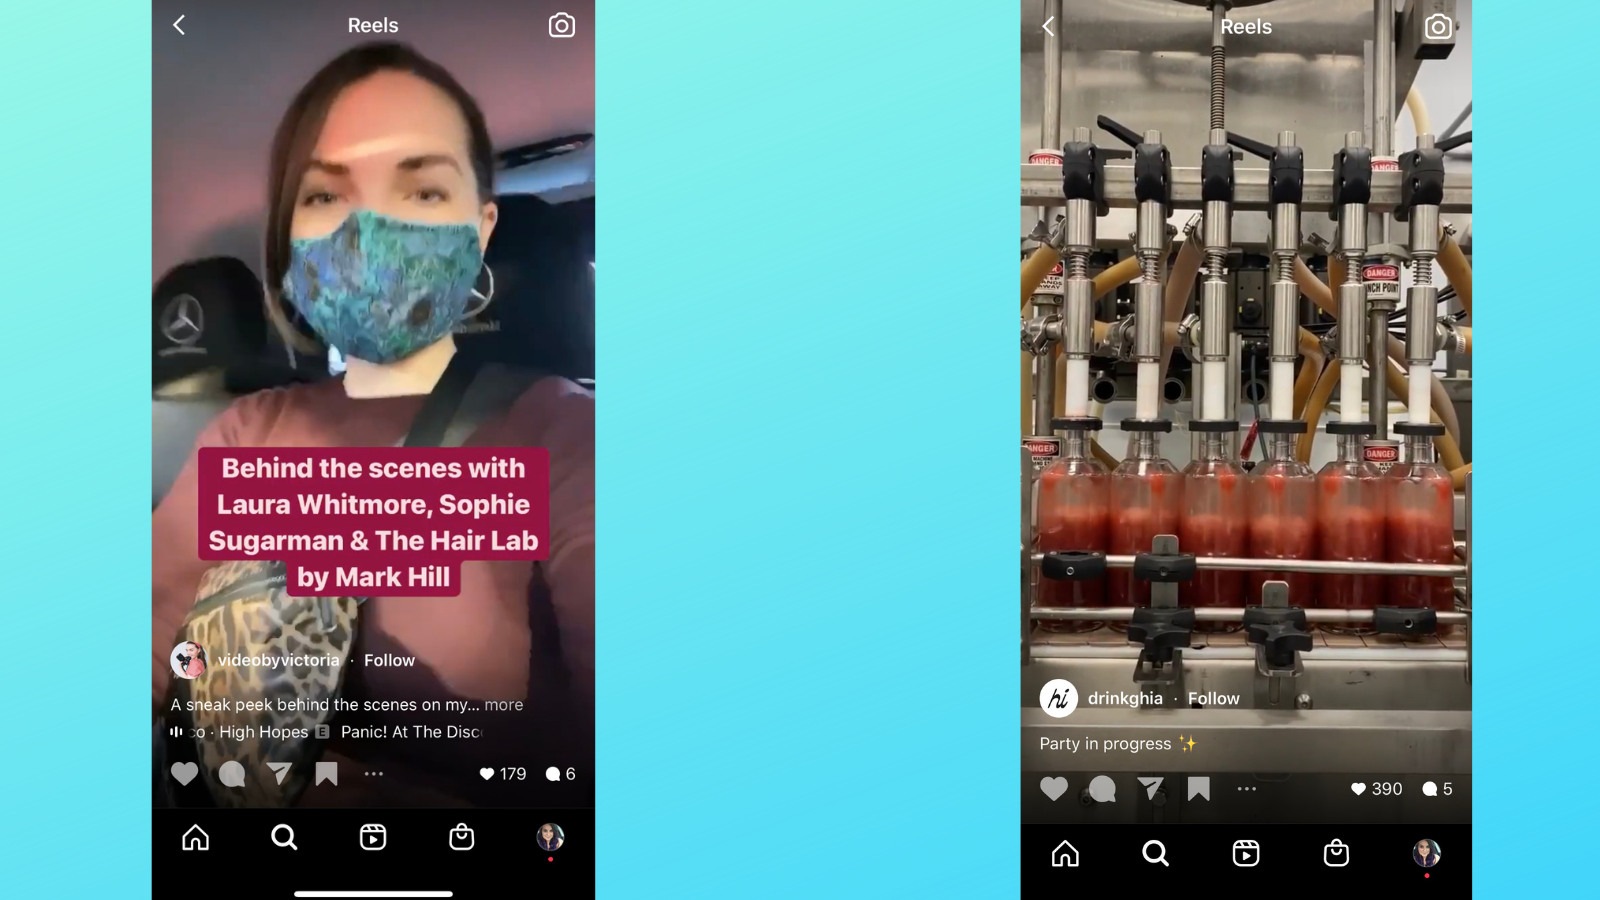 Screenshots displaying behind-the-scenes Reels from two Instagram users, Video by Victoria and GHIA